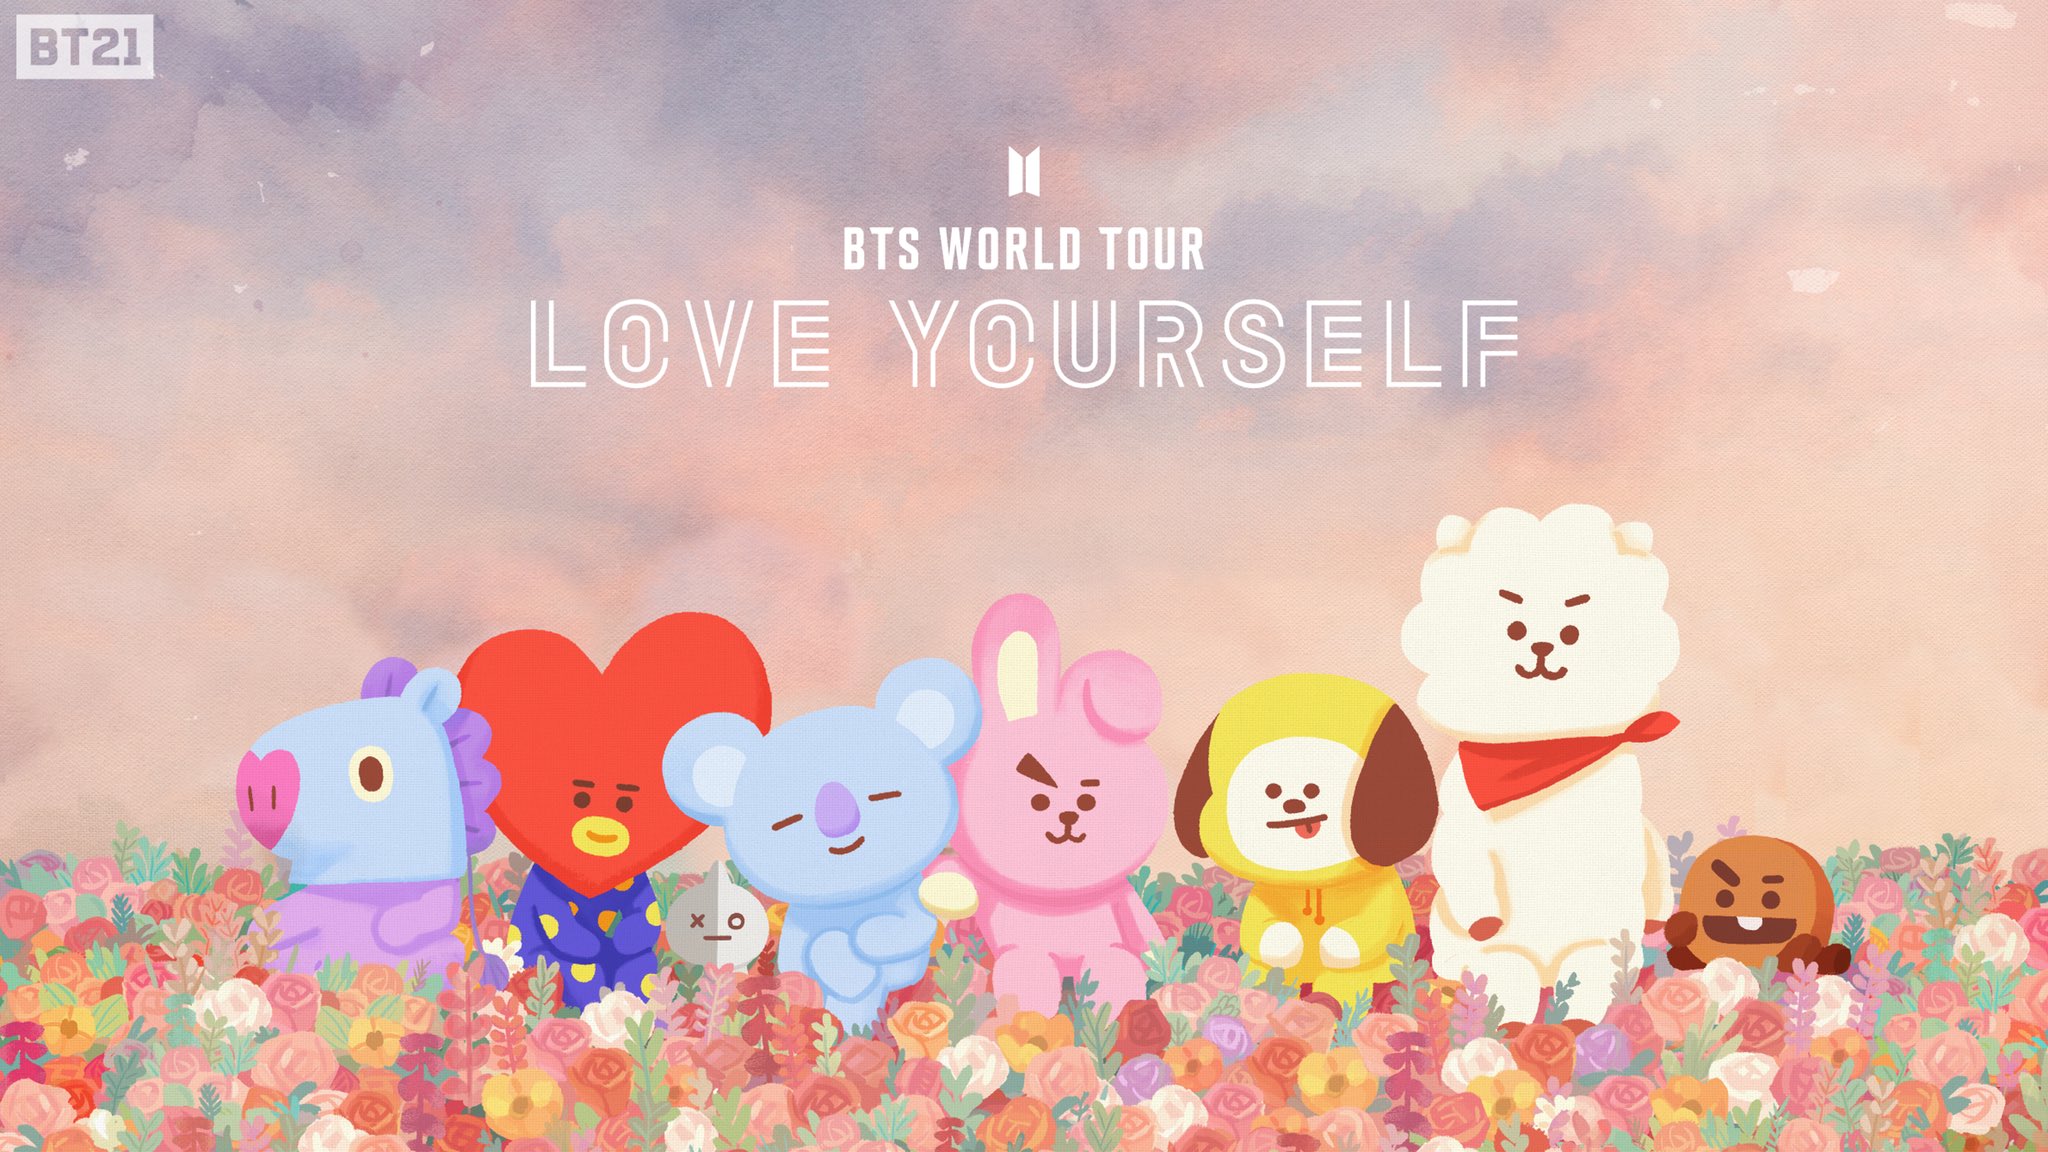  BT21  on Twitter Now it s time to LOVEYOURSELF  1DAY 